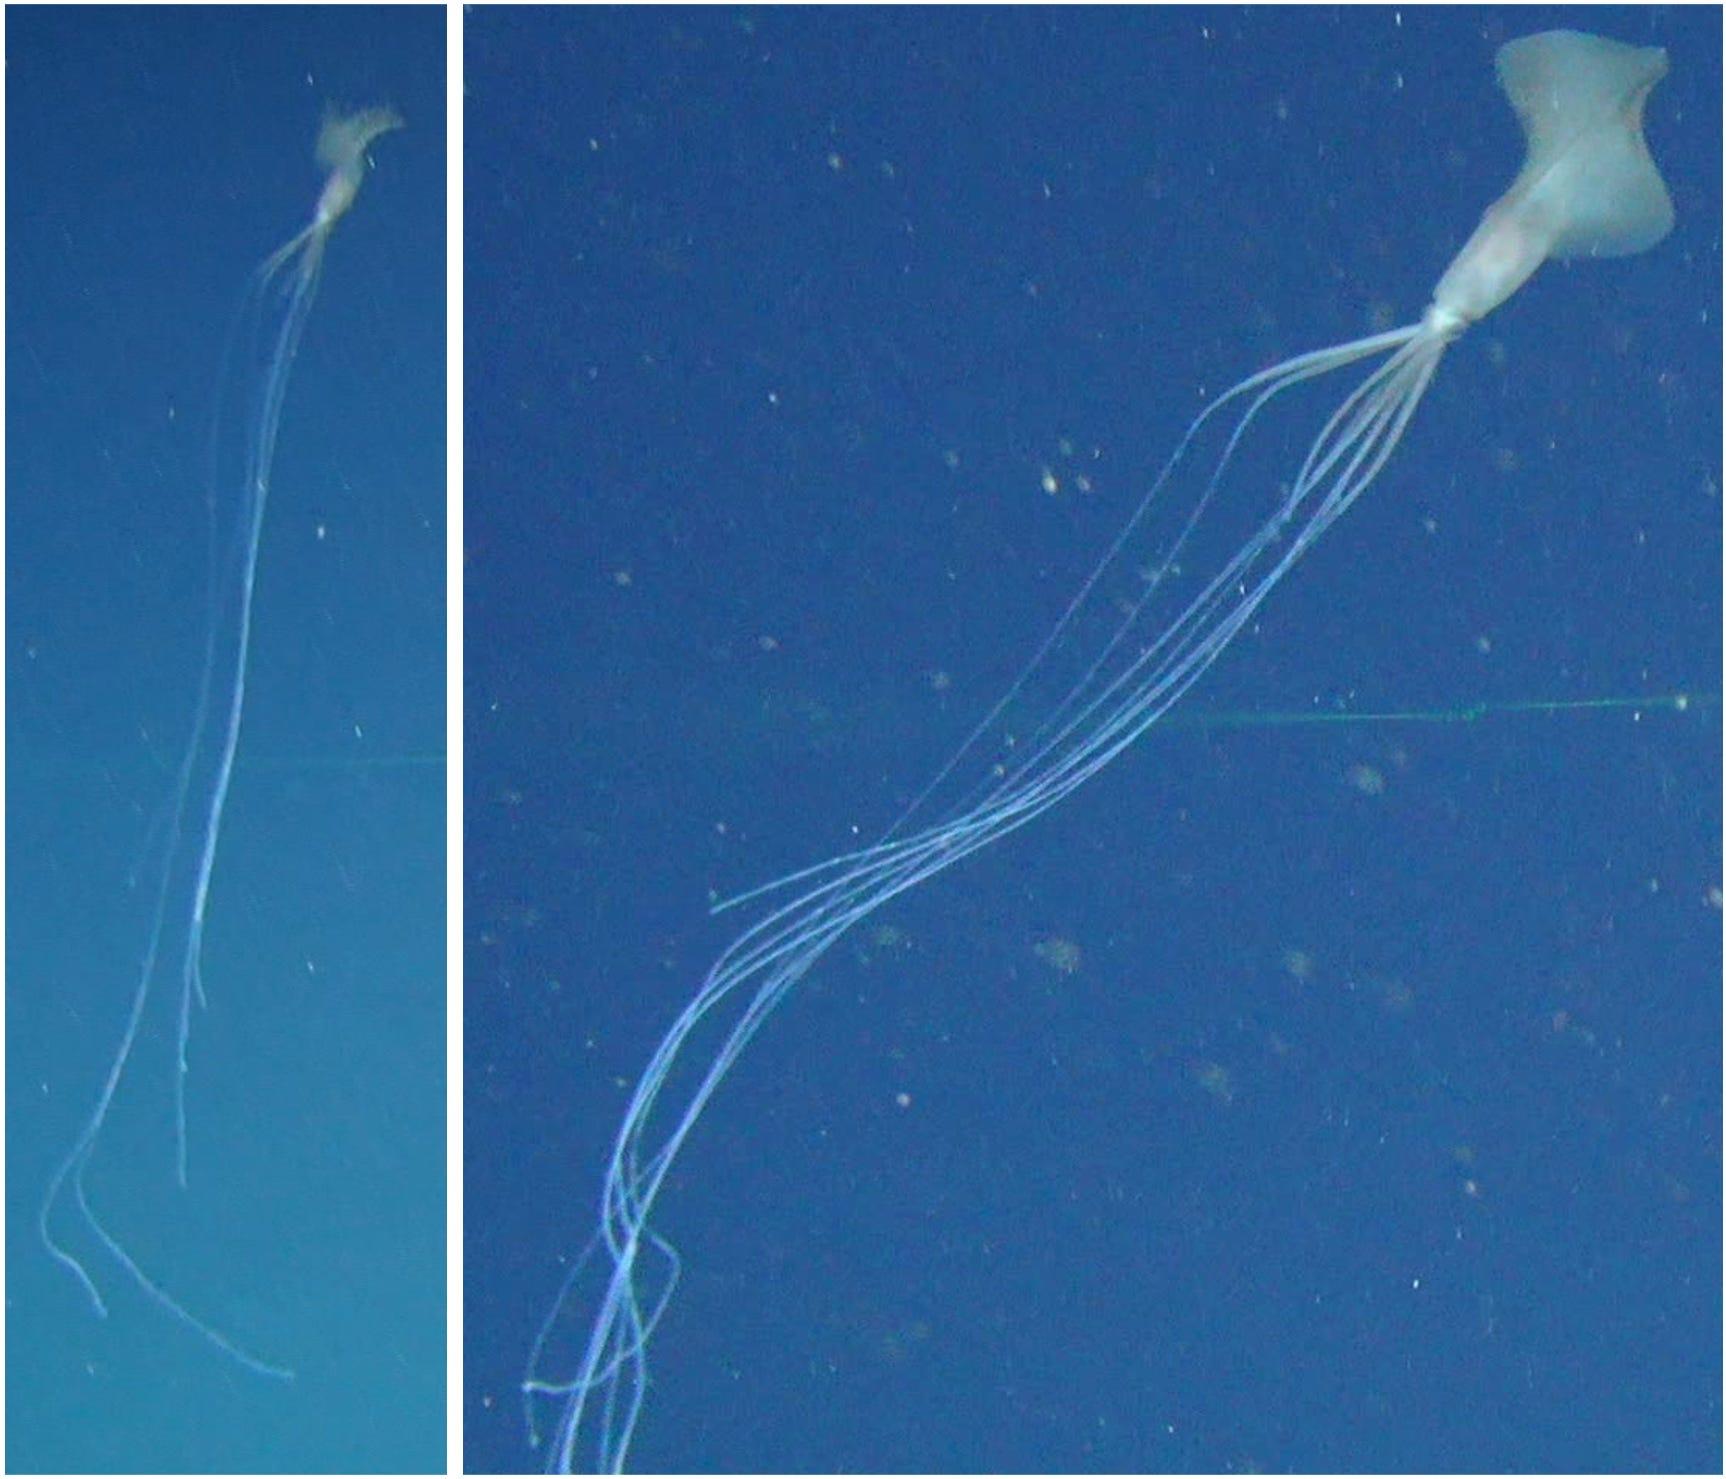 Scientists captured video of a rare squid with tentacles as long as a